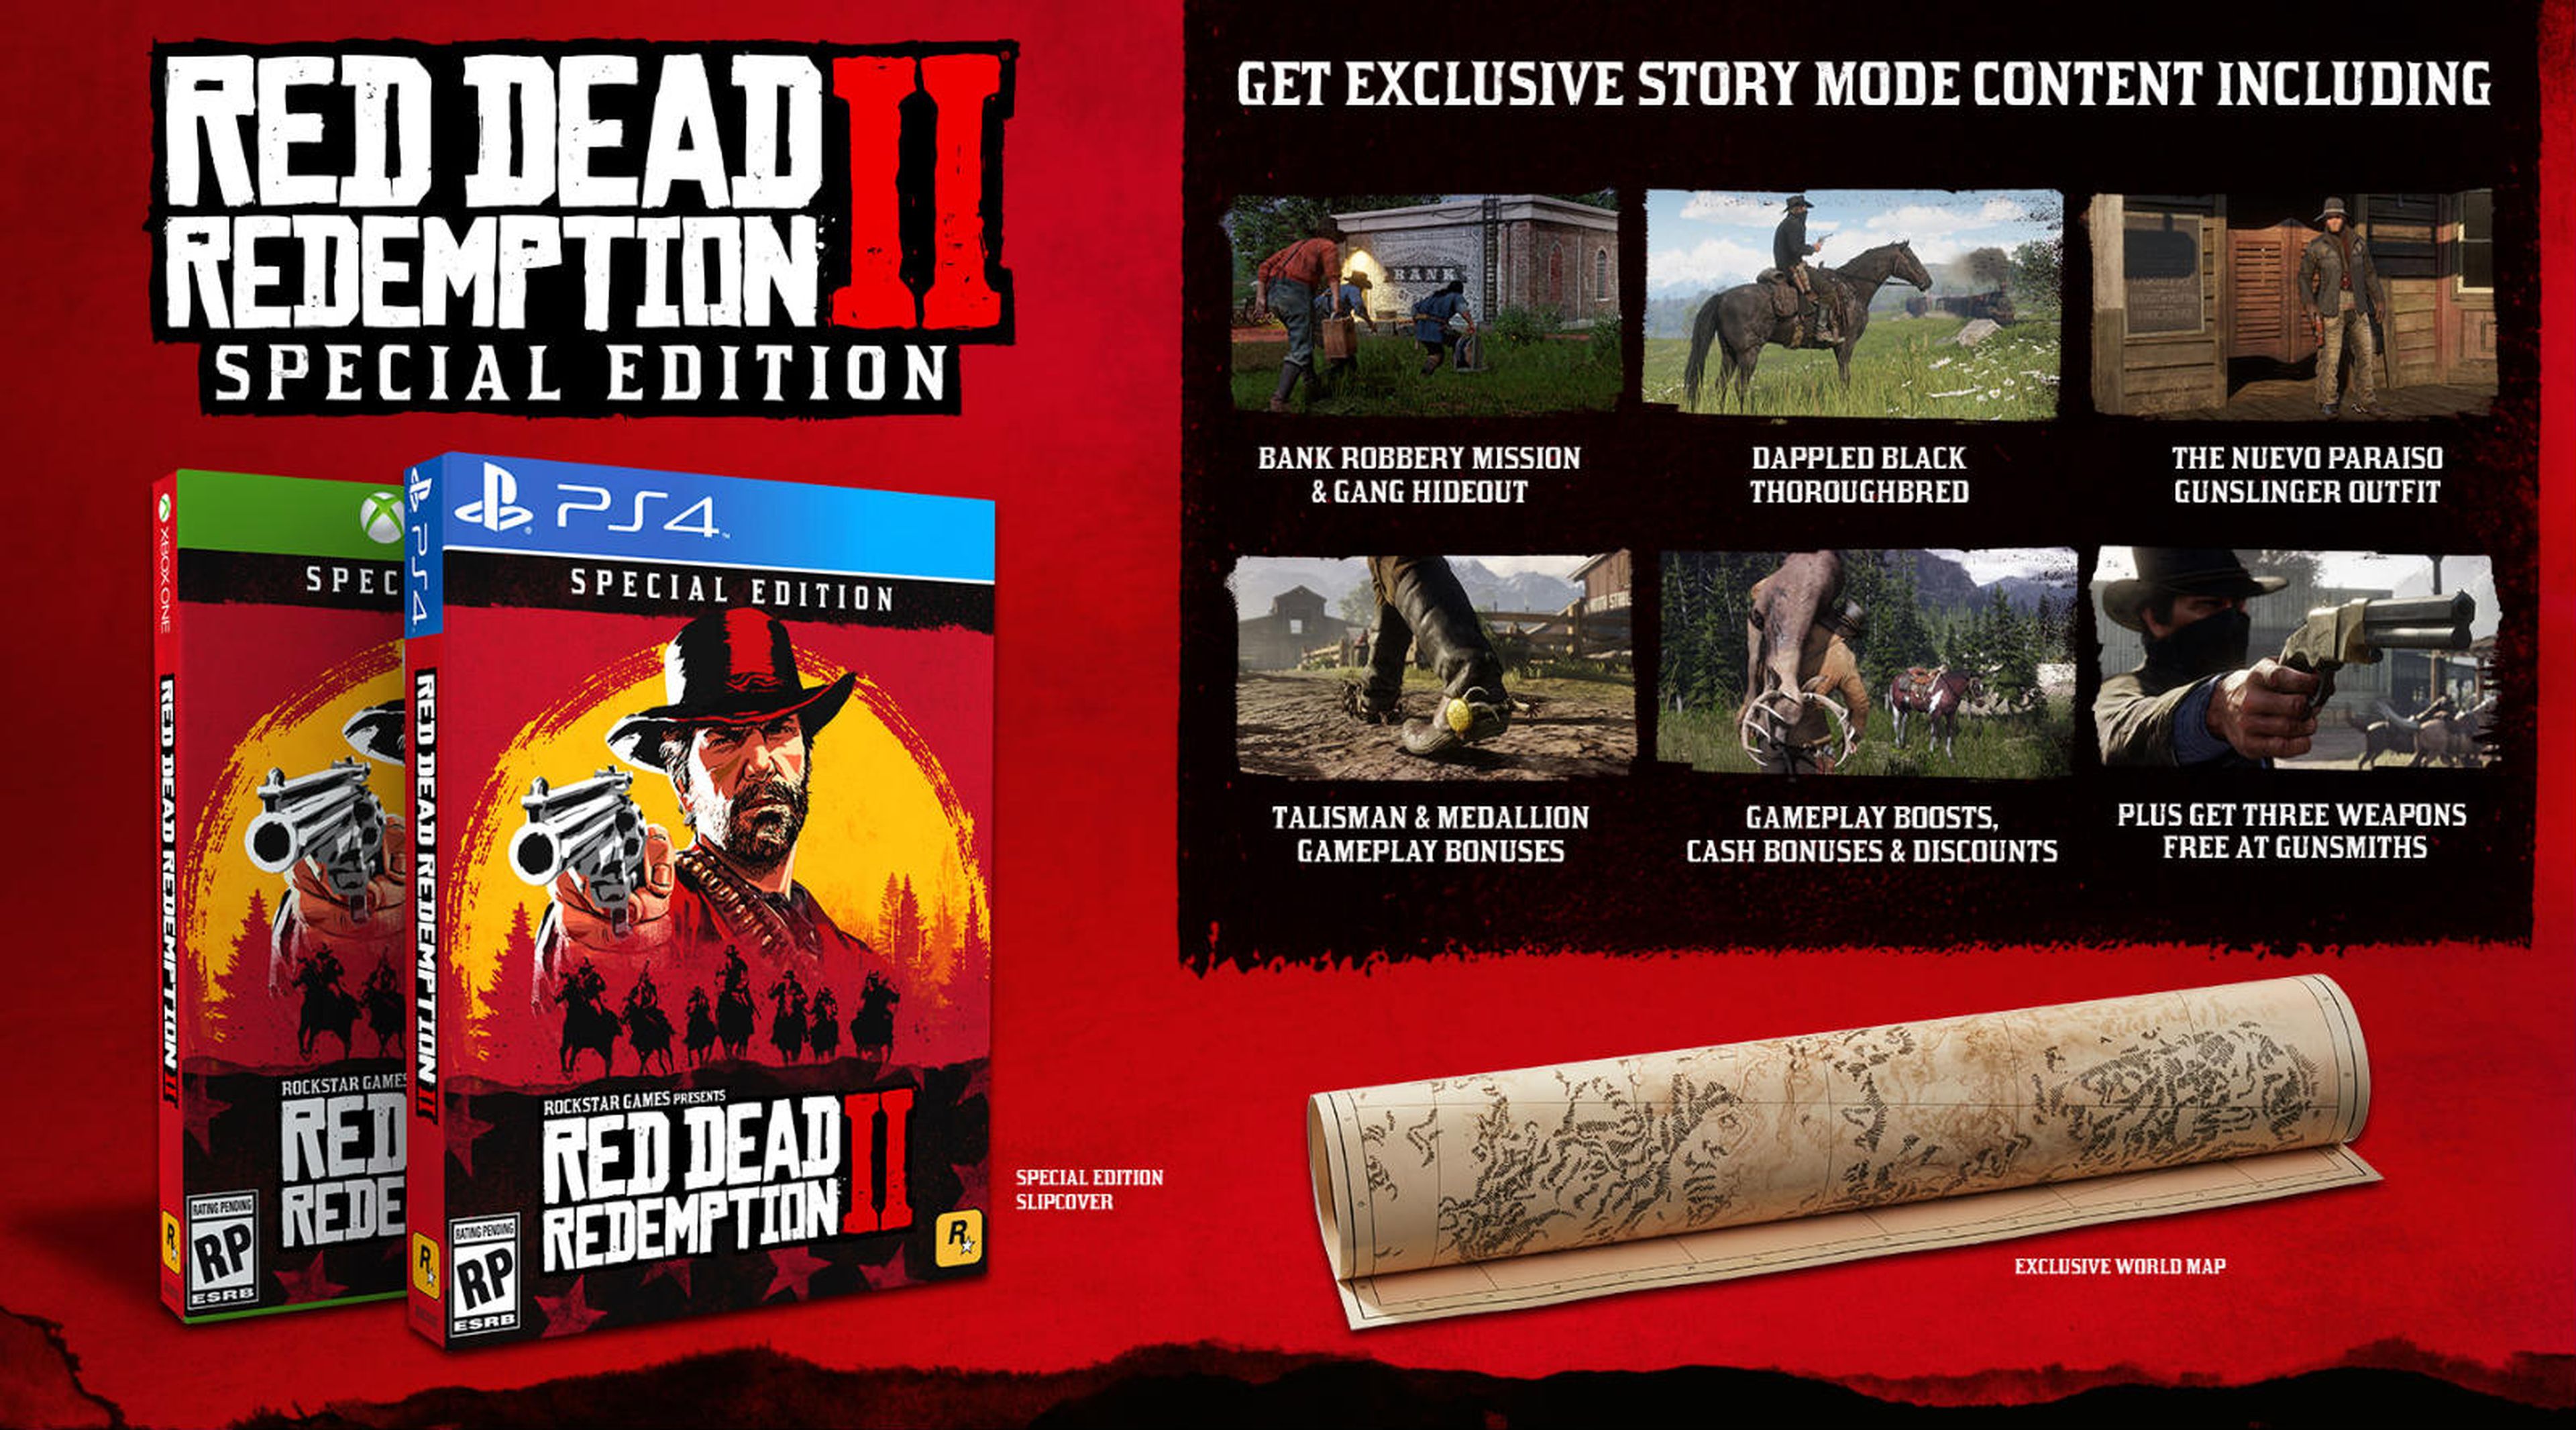 Special Edition Red Dead Redemption 2